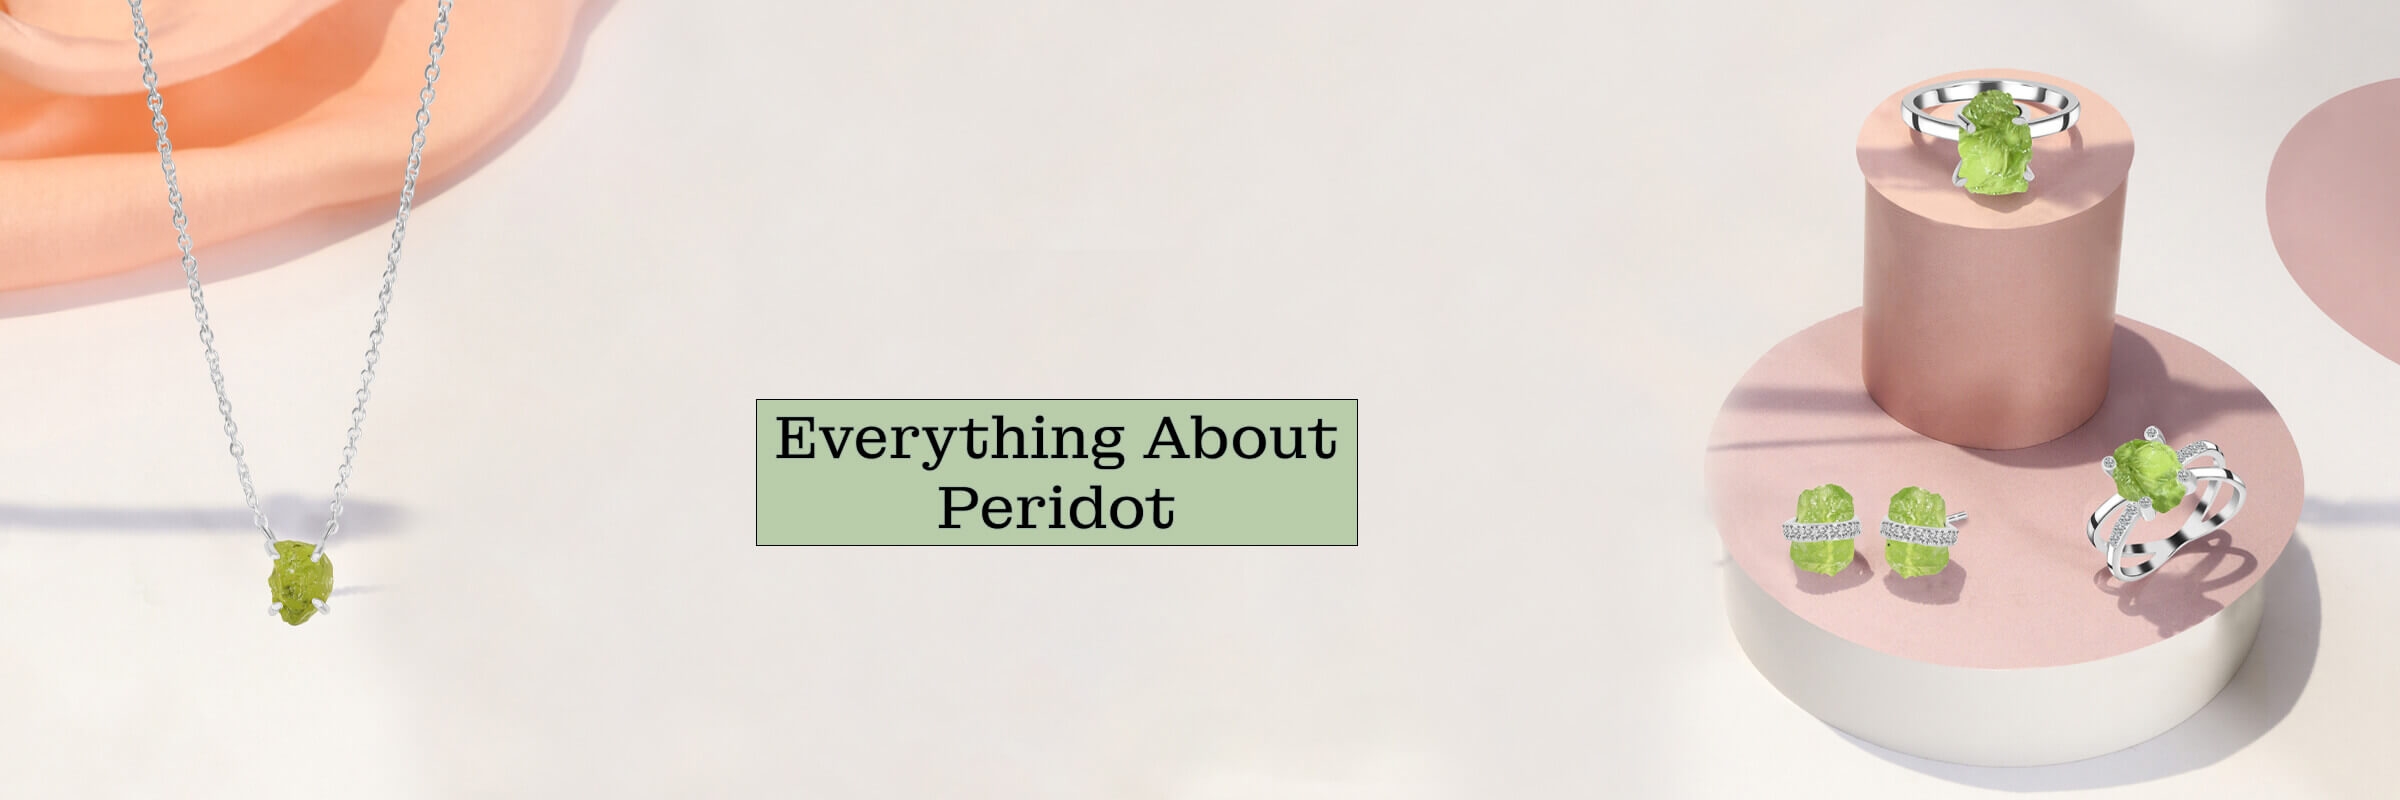 Peridot Healing Properties, Meaning, and History